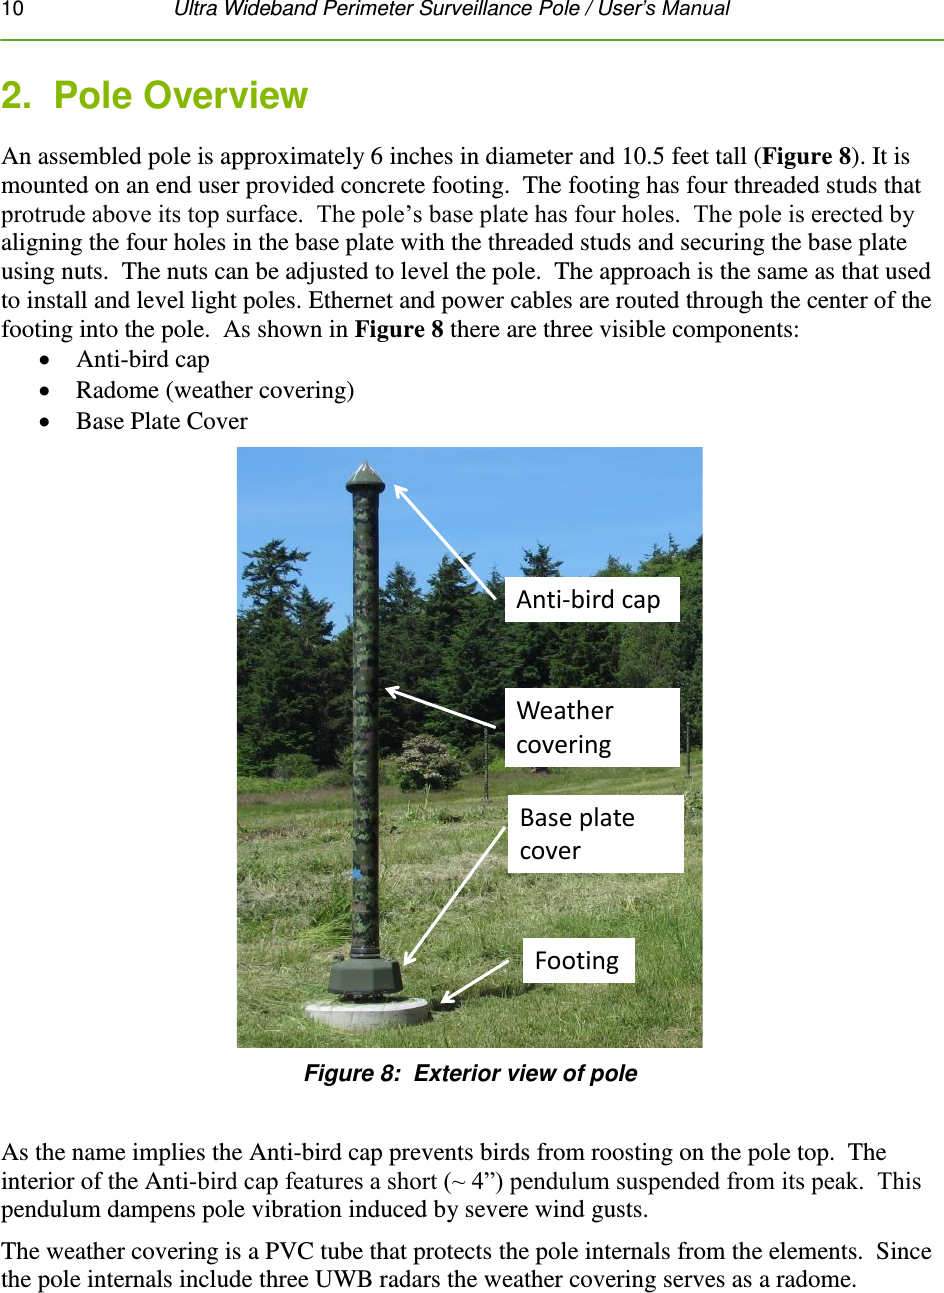 10   Ultra Wideband Perimeter Surveillance Pole / User’s Manual  2.  Pole Overview An assembled pole is approximately 6 inches in diameter and 10.5 feet tall (Figure 8). It is mounted on an end user provided concrete footing.  The footing has four threaded studs that protrude above its top surface.  The pole’s base plate has four holes.  The pole is erected by aligning the four holes in the base plate with the threaded studs and securing the base plate using nuts.  The nuts can be adjusted to level the pole.  The approach is the same as that used to install and level light poles. Ethernet and power cables are routed through the center of the footing into the pole.  As shown in Figure 8 there are three visible components:  Anti-bird cap  Radome (weather covering)  Base Plate Cover Anti-bird capWeather coveringBase plate coverFooting Figure 8:  Exterior view of pole  As the name implies the Anti-bird cap prevents birds from roosting on the pole top.  The interior of the Anti-bird cap features a short (~ 4”) pendulum suspended from its peak.  This pendulum dampens pole vibration induced by severe wind gusts. The weather covering is a PVC tube that protects the pole internals from the elements.  Since the pole internals include three UWB radars the weather covering serves as a radome.     